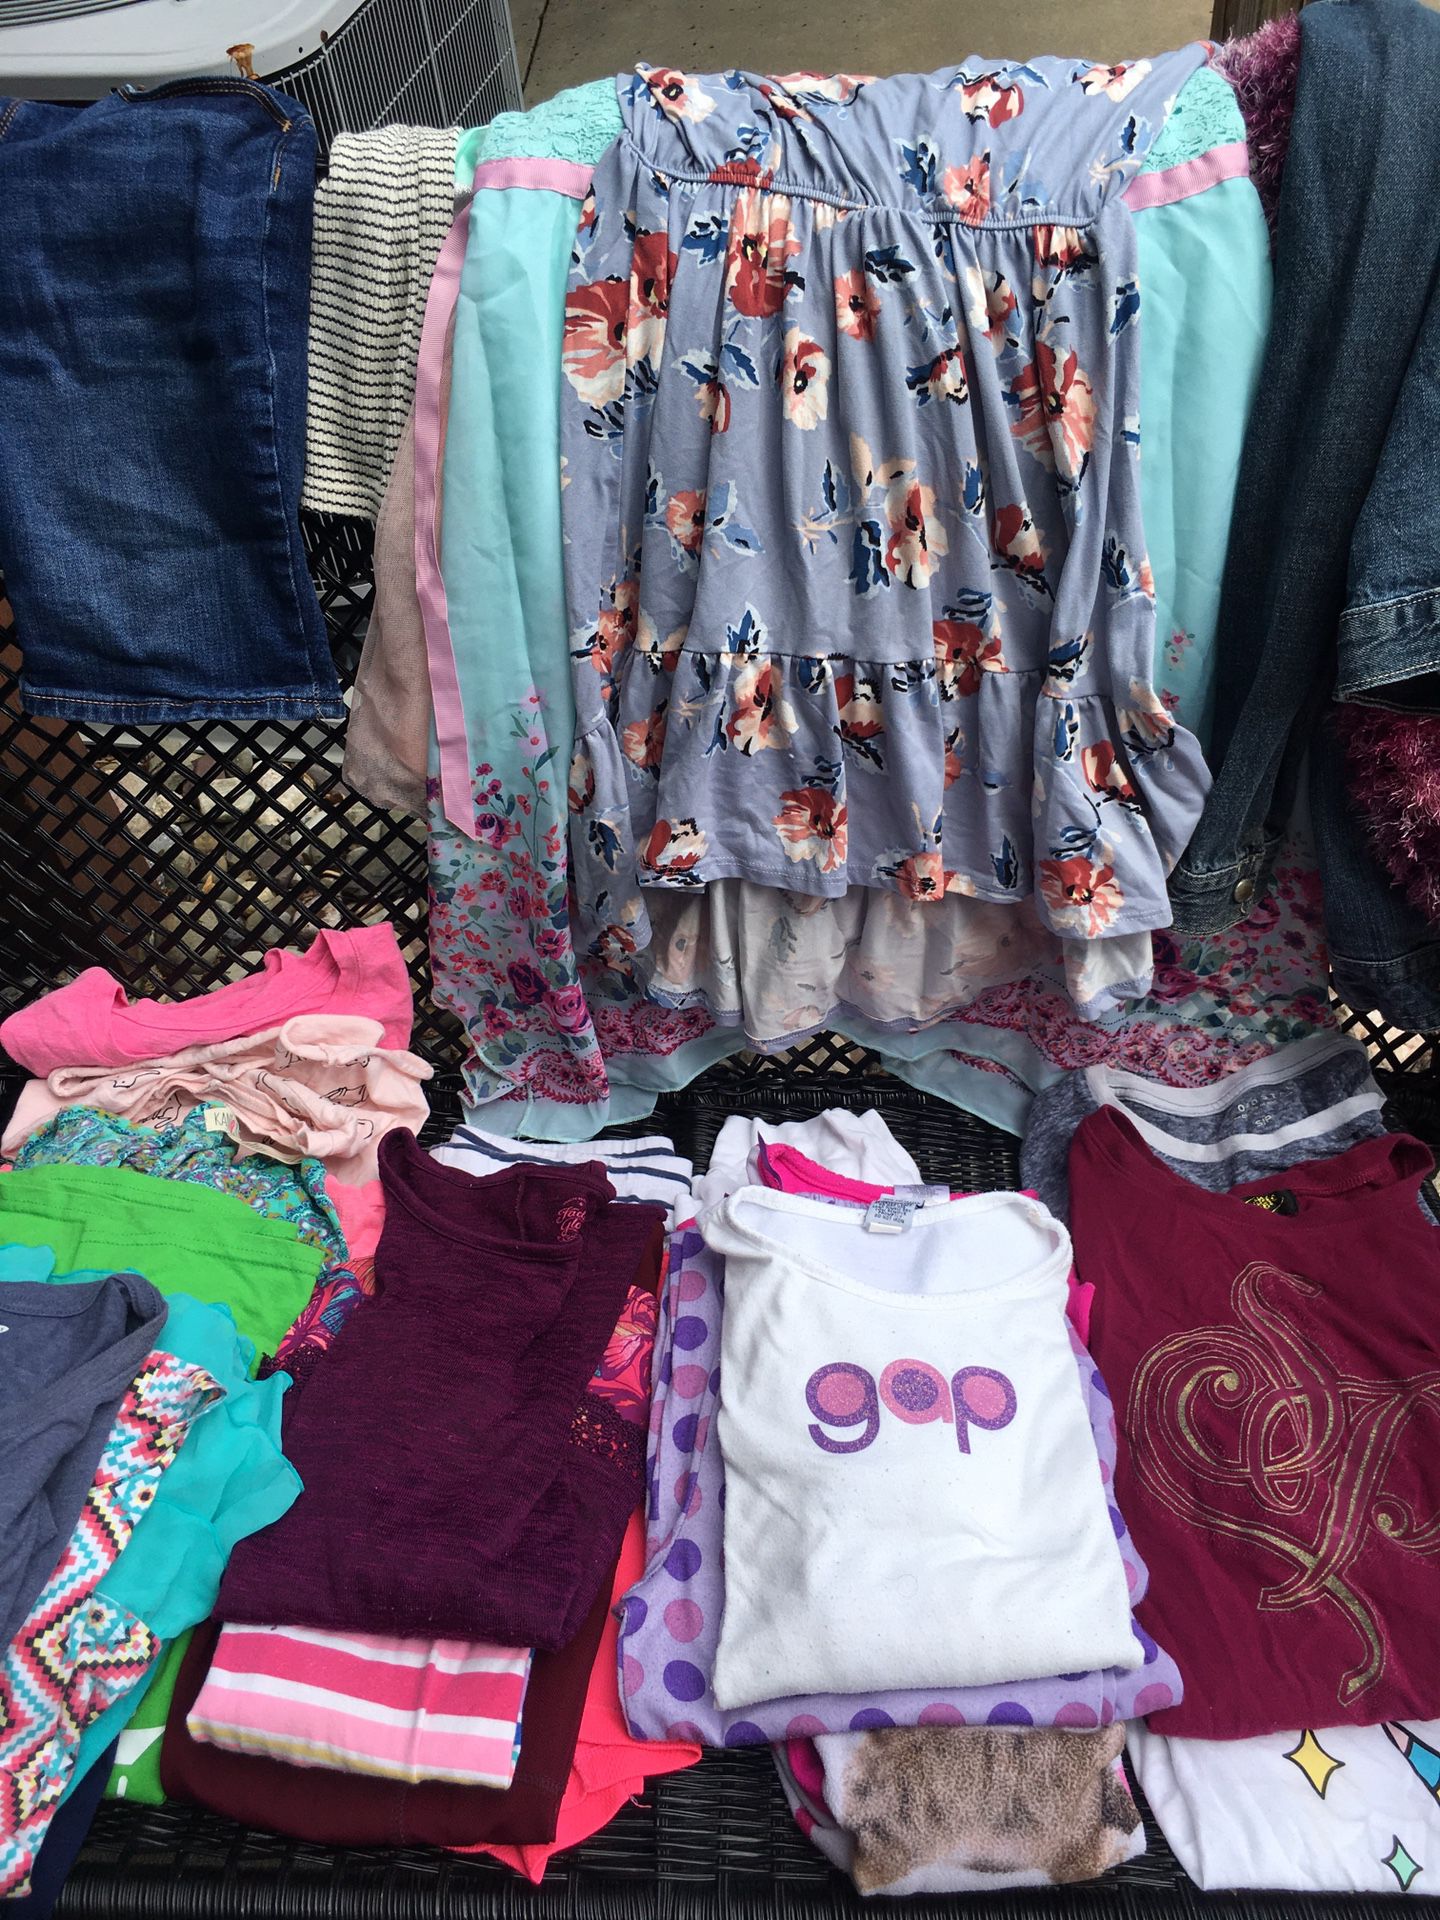 Girls clothes size 10-14